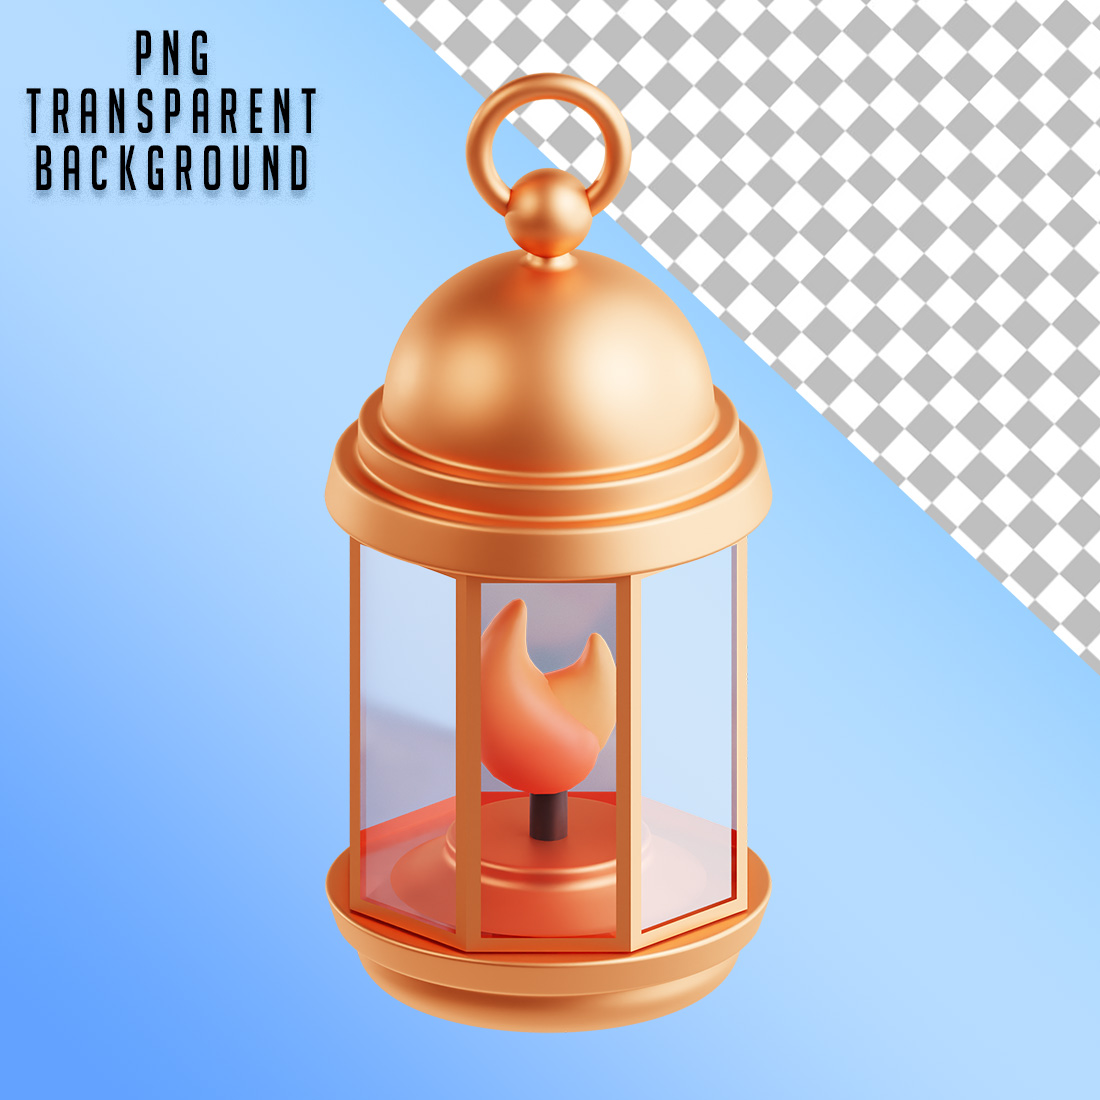 Golden lantern with a flame inside on a blue background.